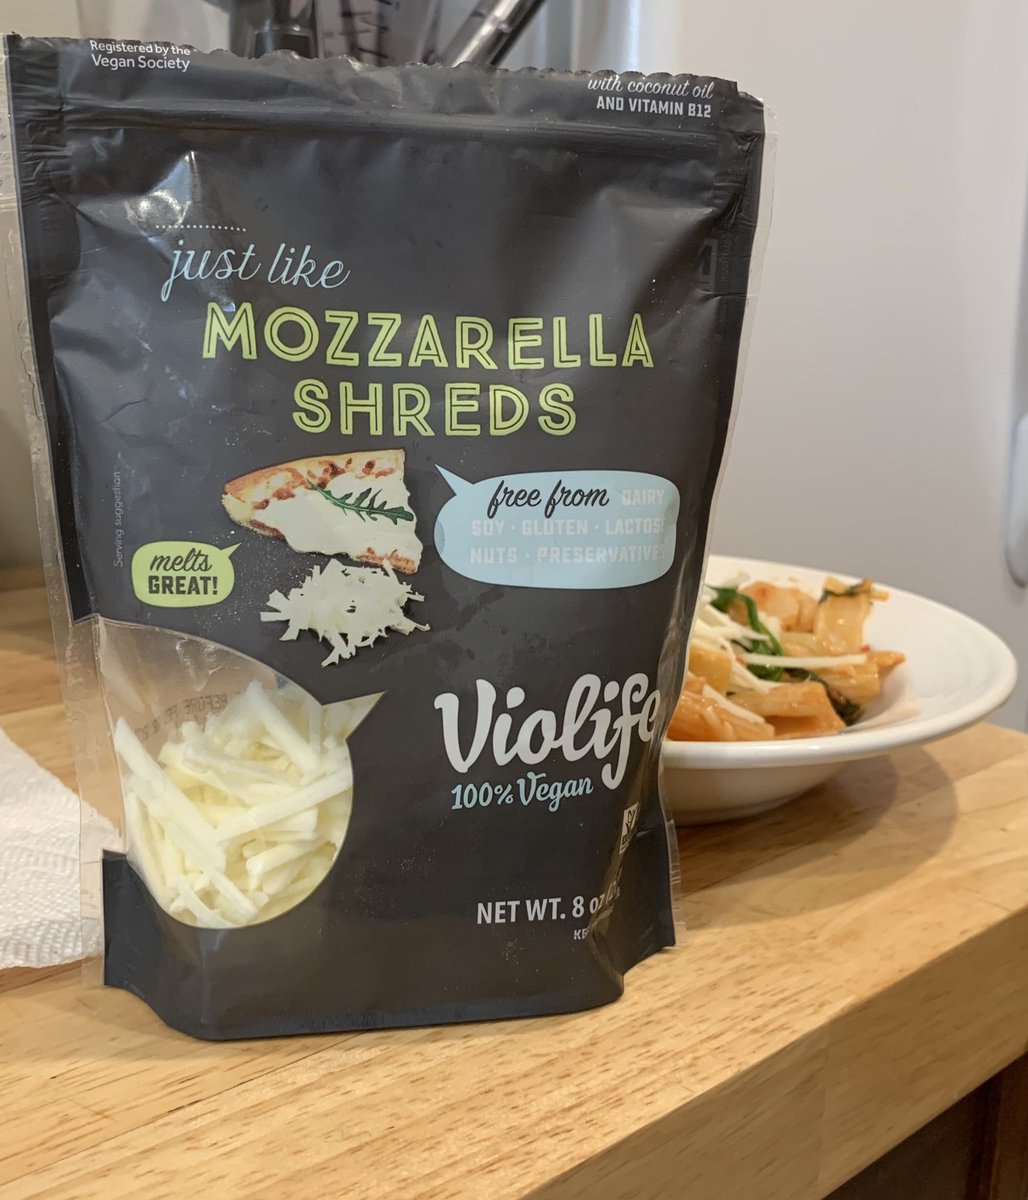 I swear this tastes exactly like mozzarella 💥
I love their cheddar cheese too ❤️ 
@ViolifeFoods! Do you make Swiss flavor ⁉️⁉️
I have to check out ur site.😎 @janeunchained Good stuff 🏆